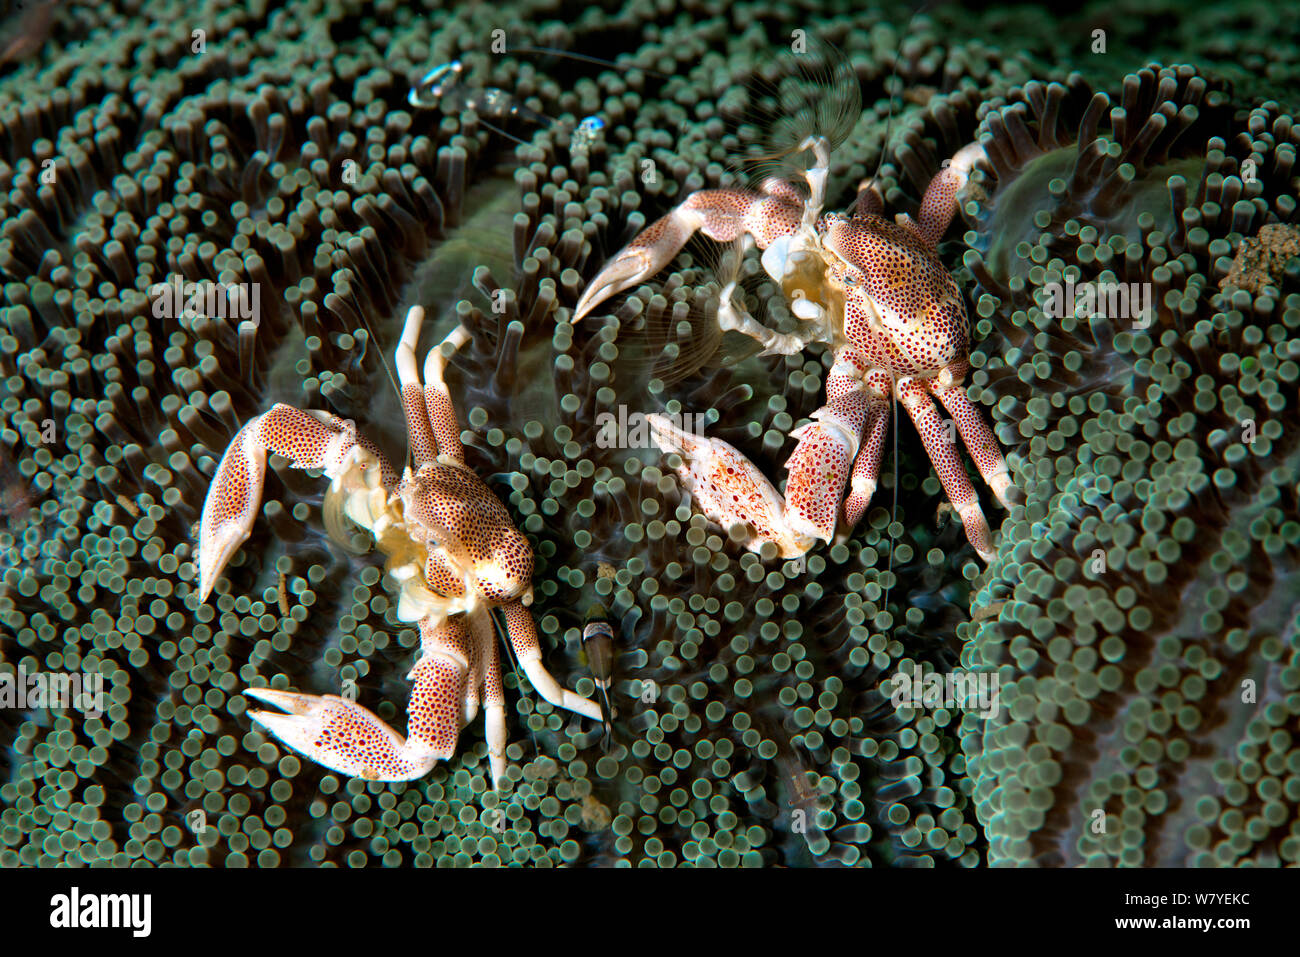 Spotted porcelain crab (Neopetrolisthes maculatus) pair. Lembeh Strait, North Sulawesi, Indonesia. Stock Photo